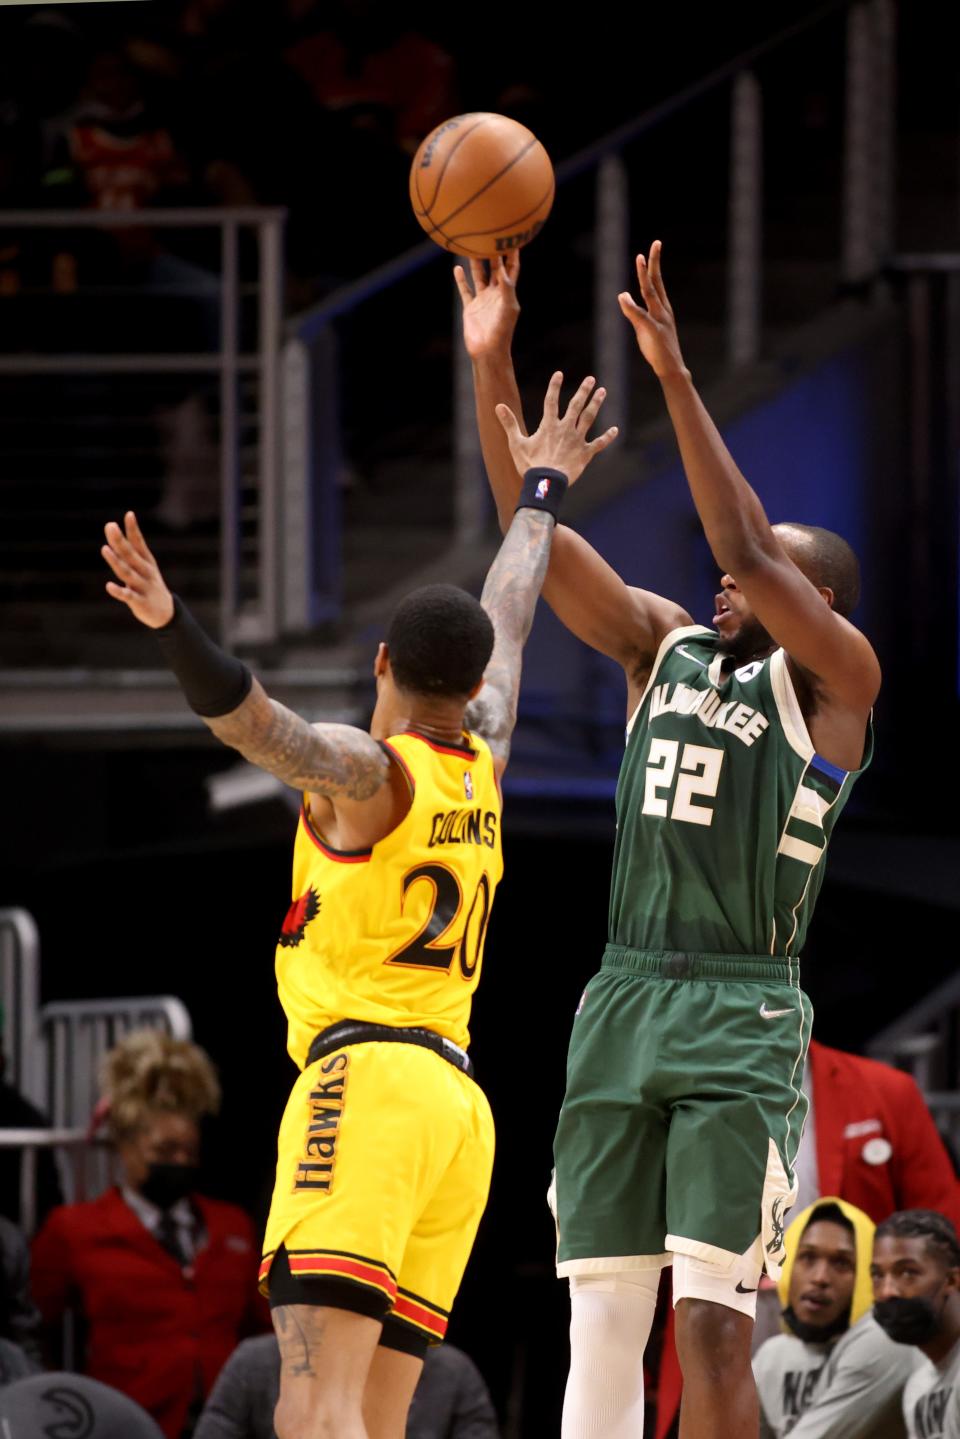 Bucks forward Khris Middleton, who had a game-high 34 points, attempts a three-pointer over Hawks forward John Collins during the second quarter Monday.